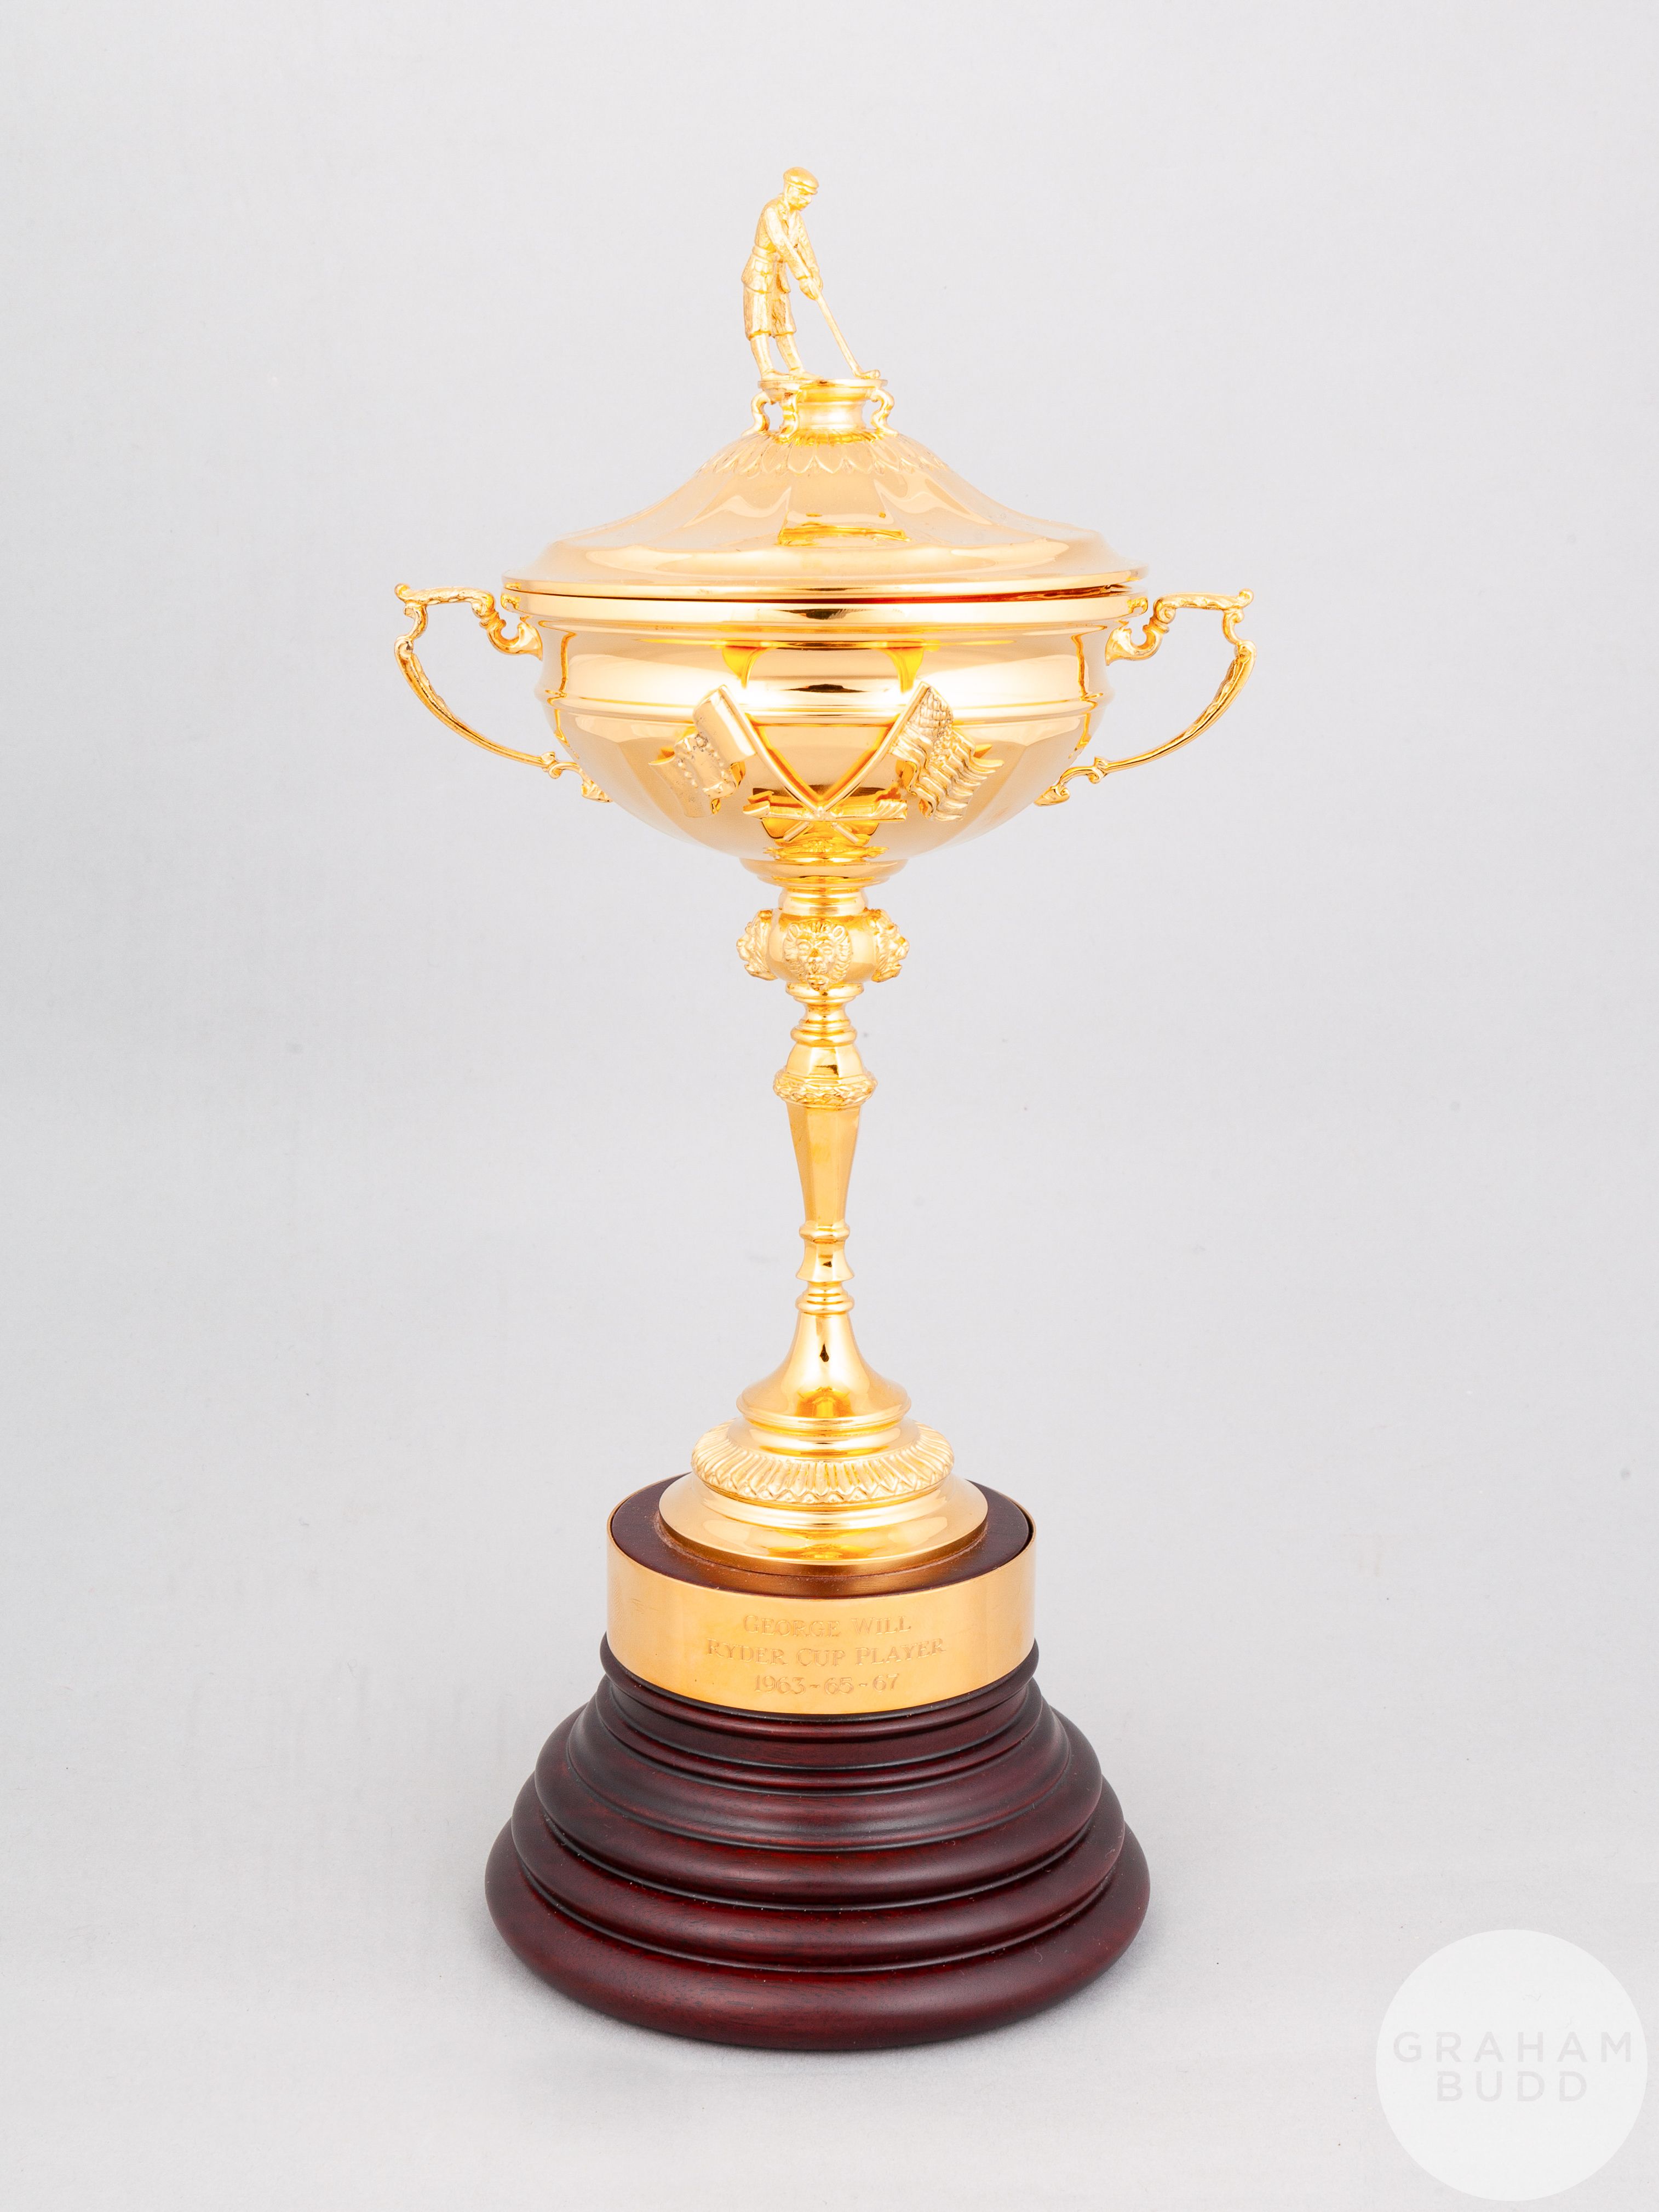 George Will rare silver-gilt replica Ryder Cup trophy - Image 3 of 11